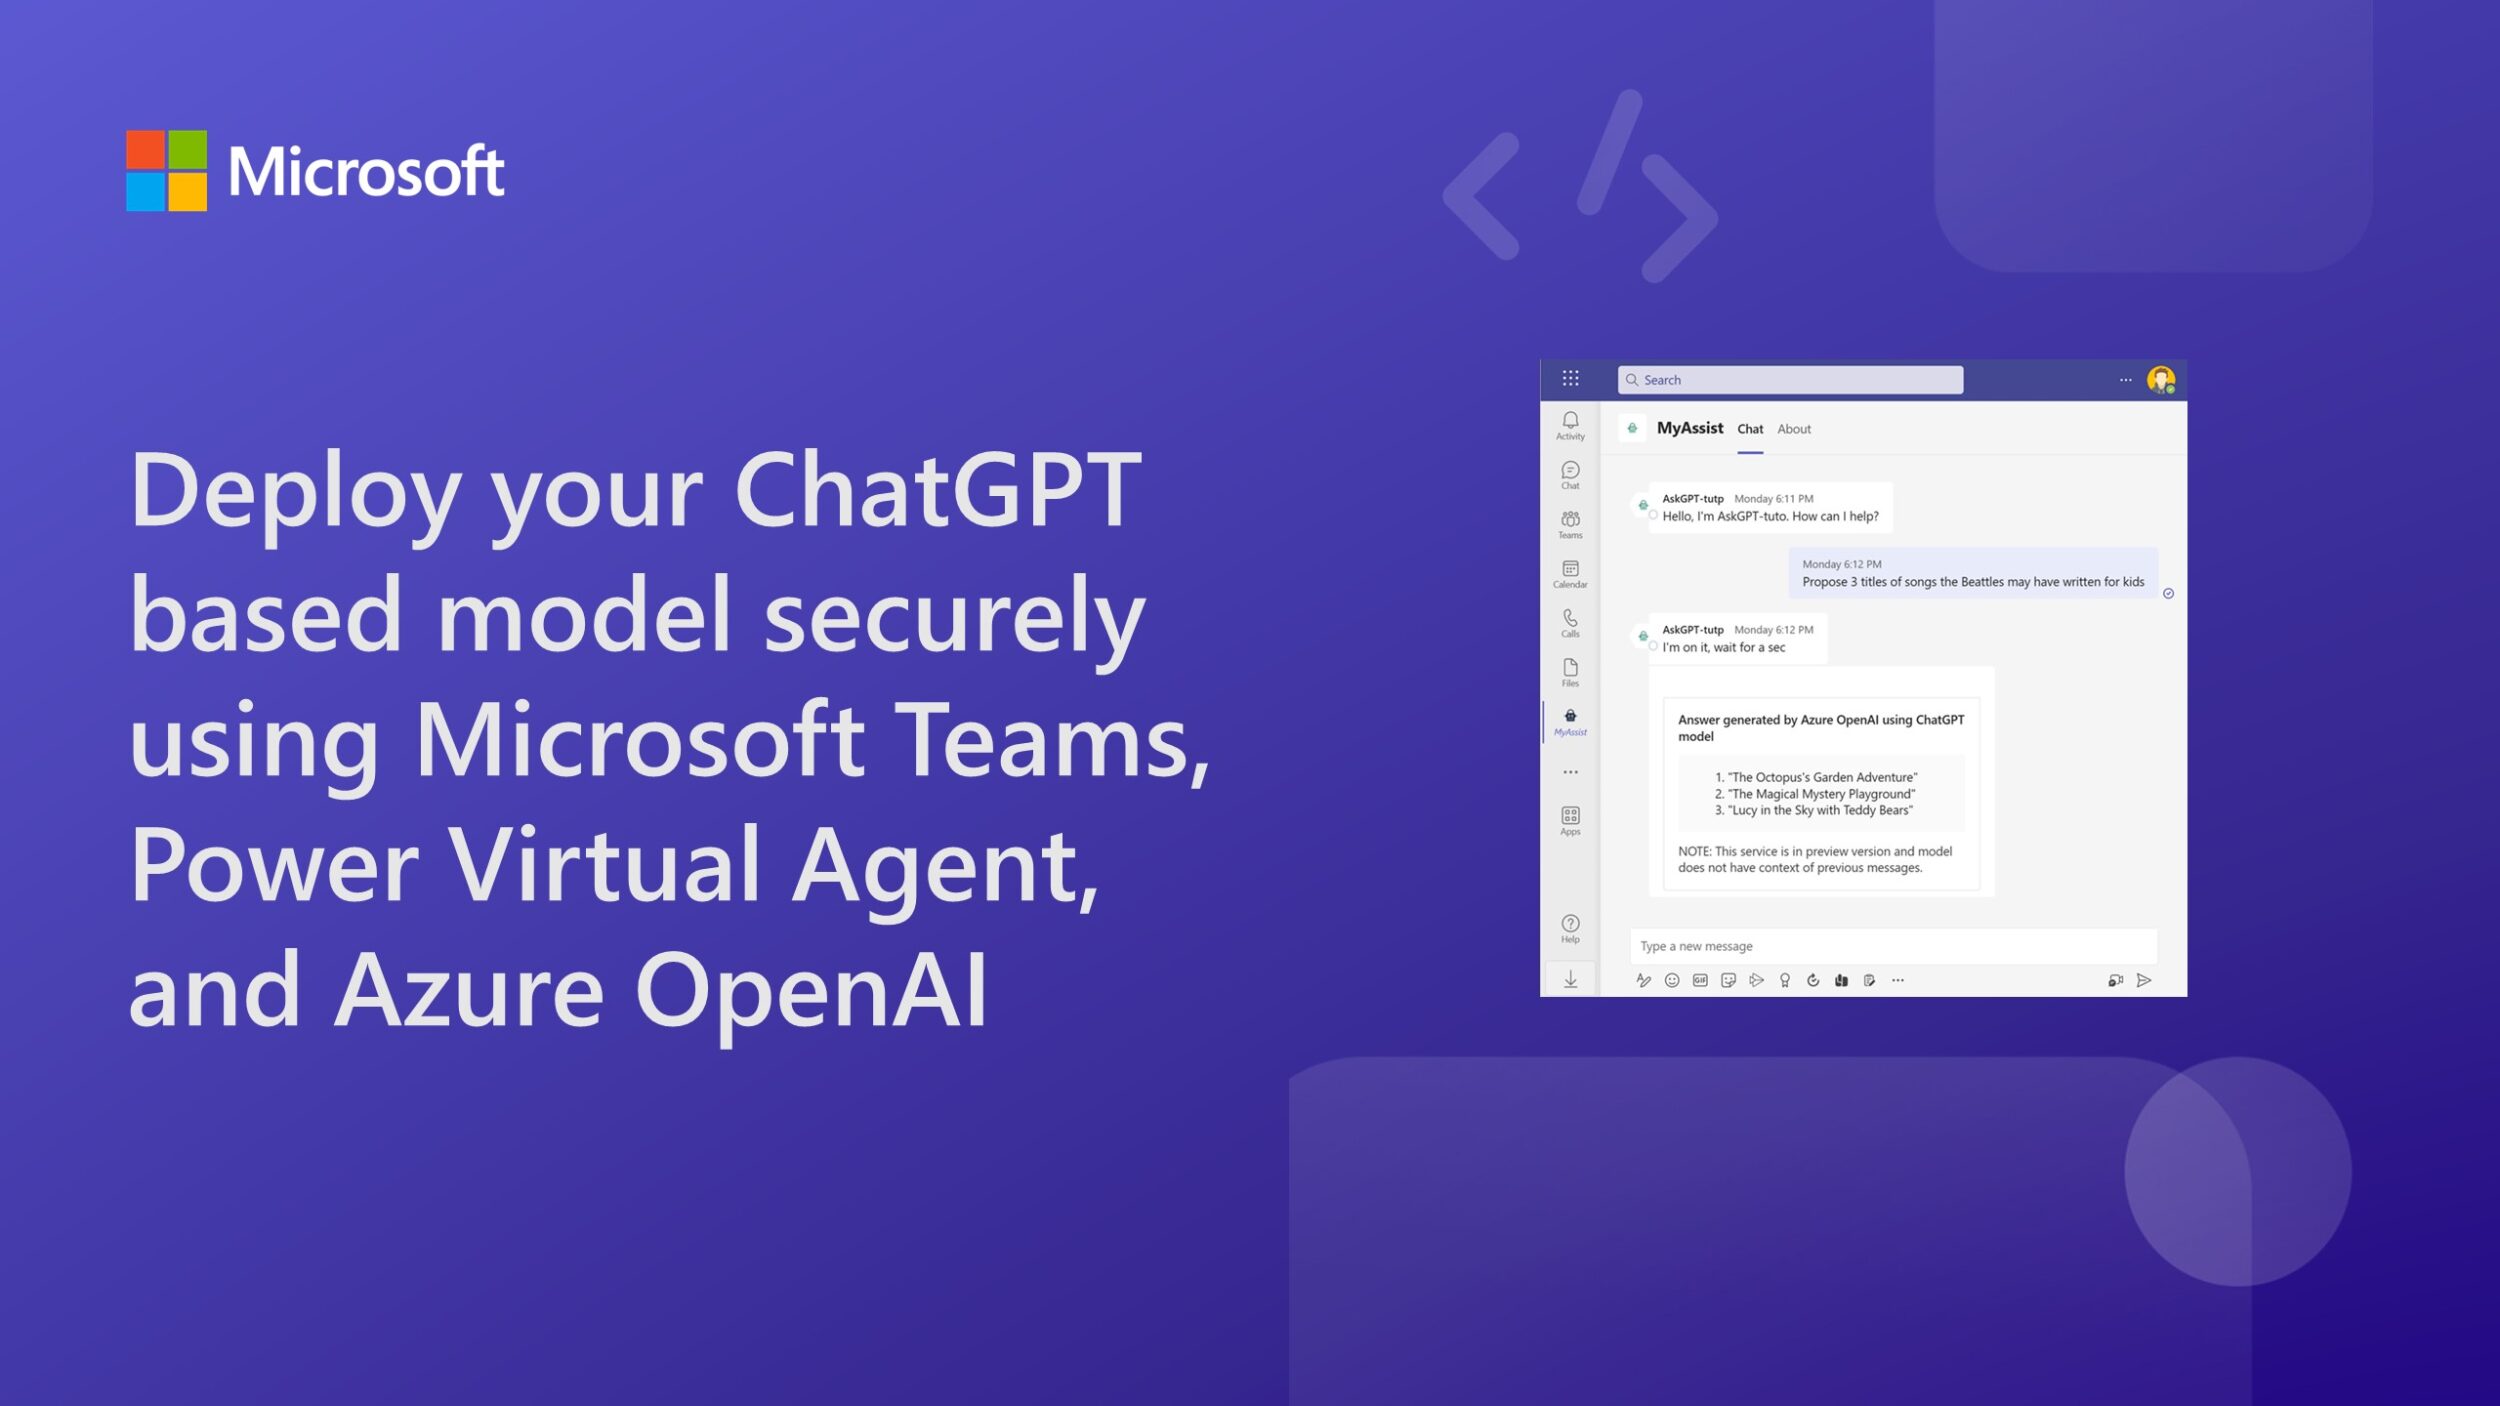 Deploy your ChatGPT based model securely using Microsoft Teams, Power Virtual Agent and Azure OpenAI